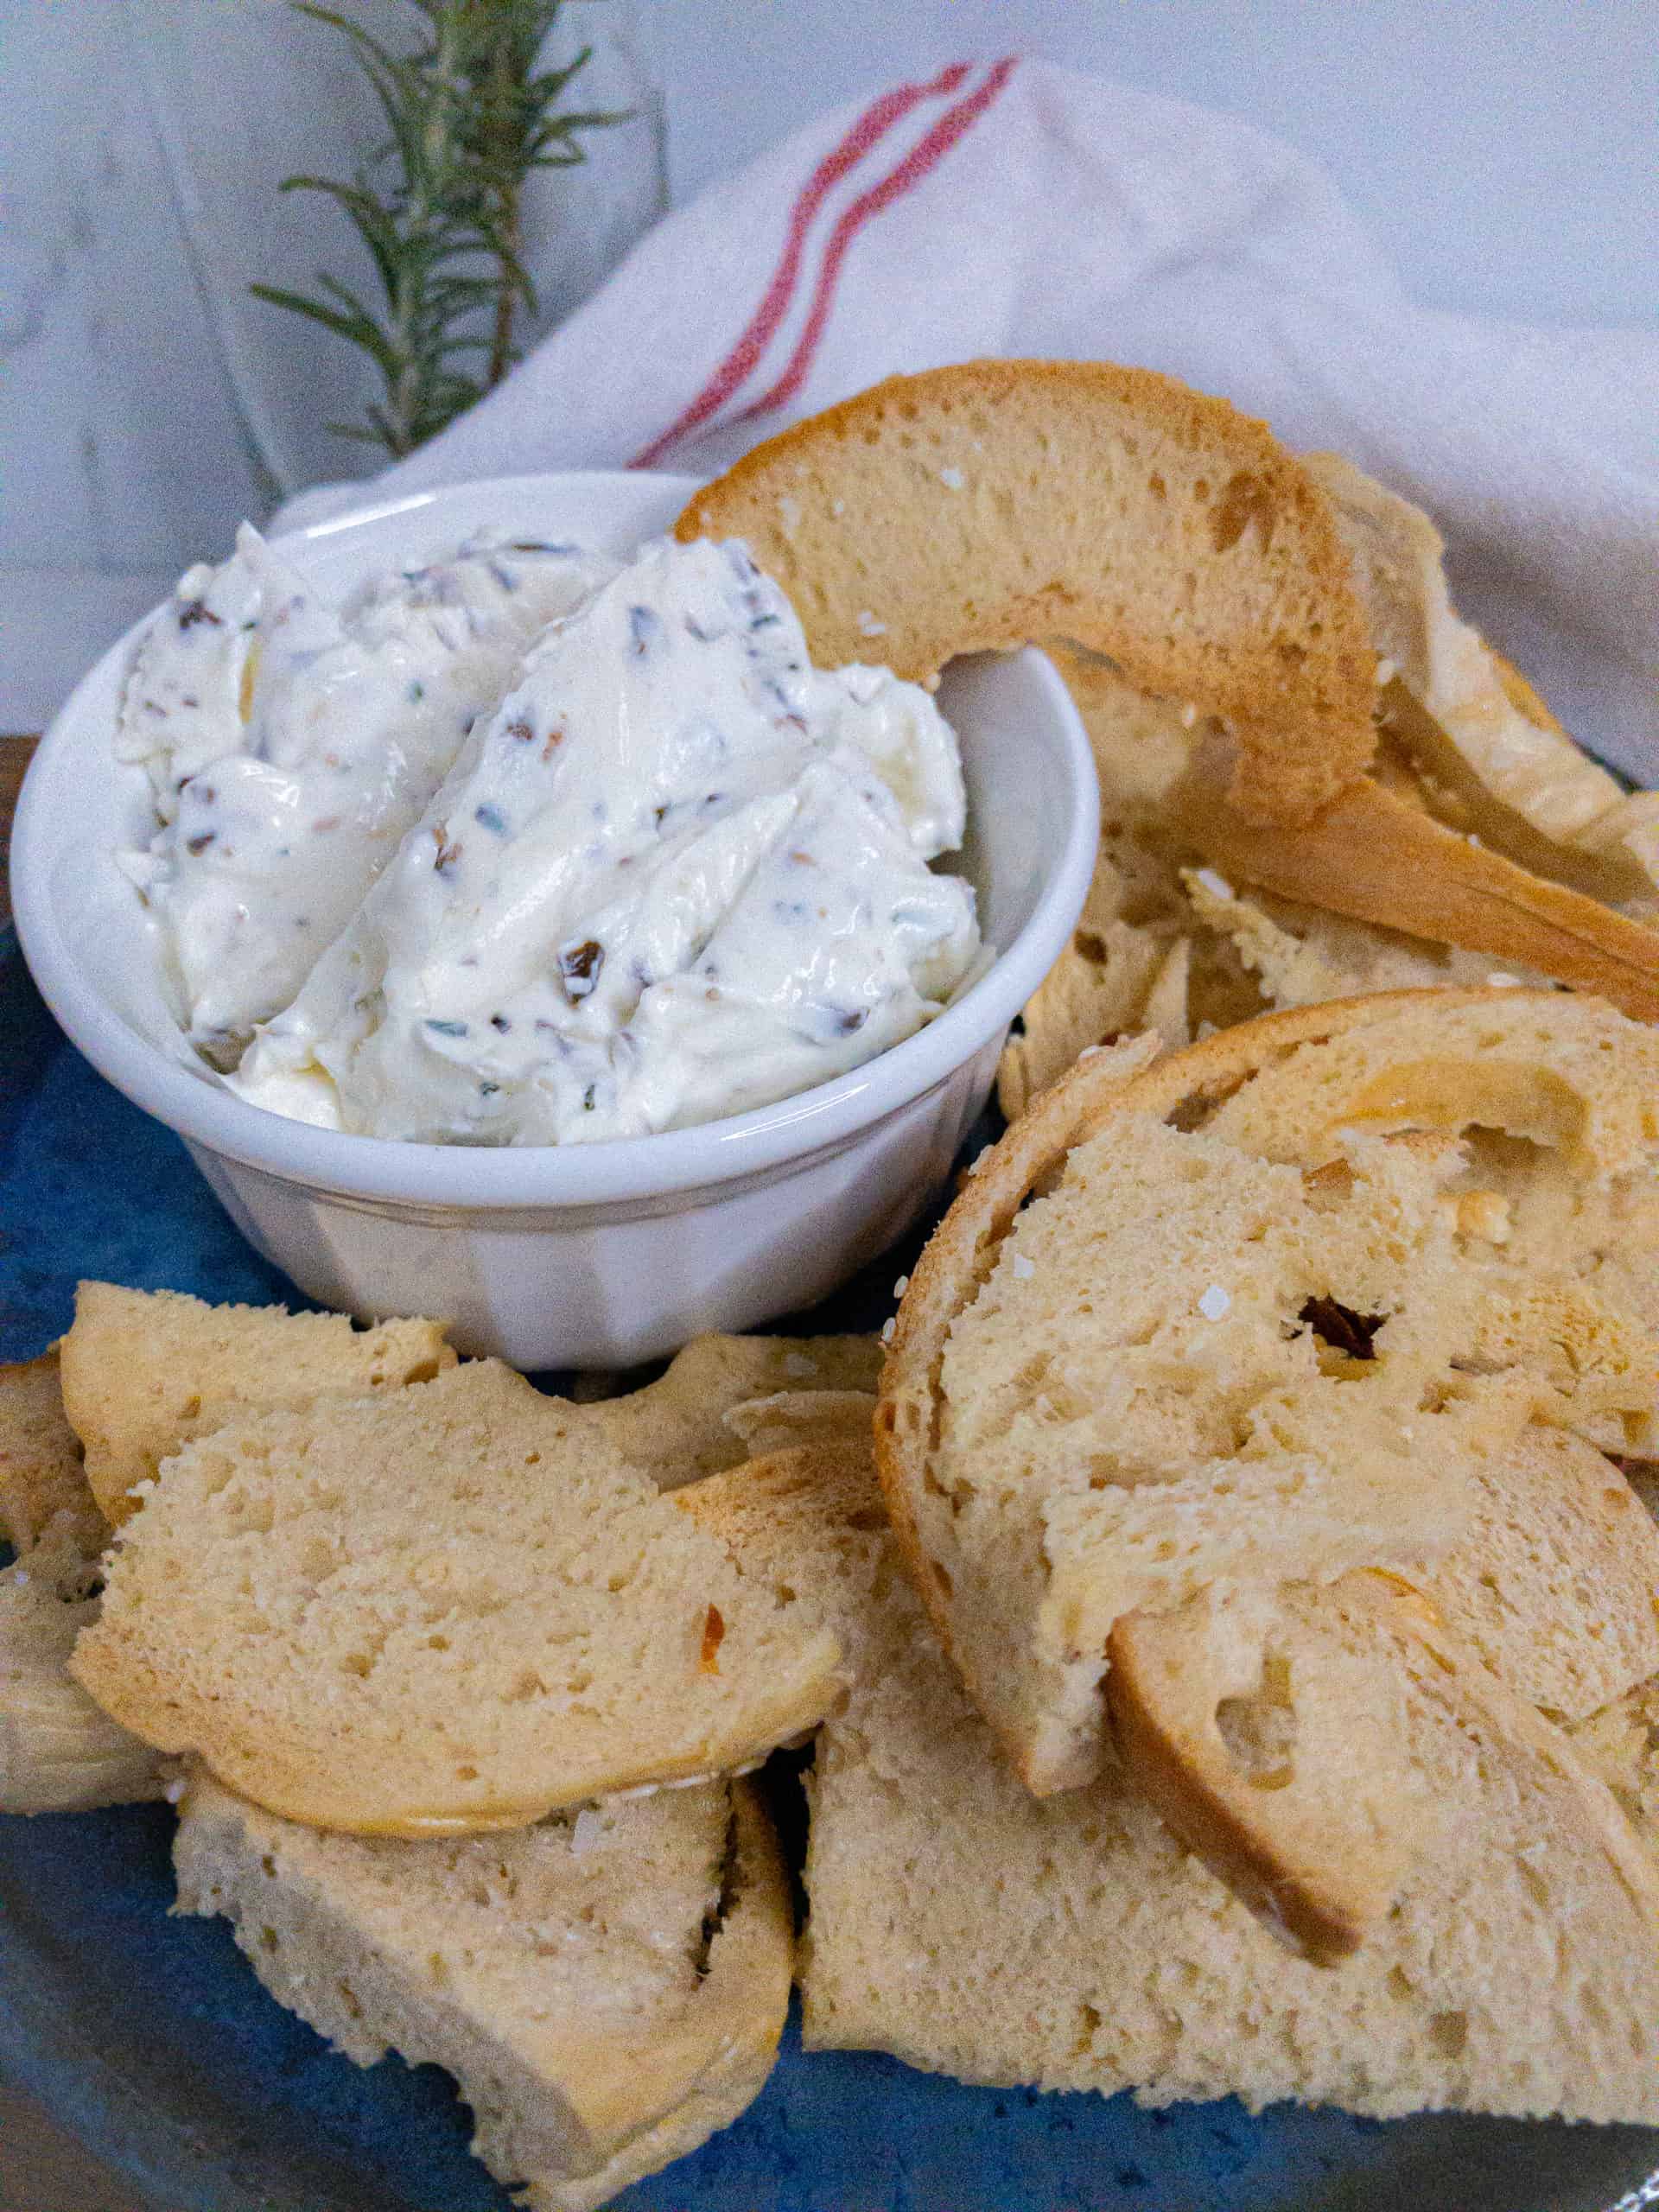 Olive and rosemary cream cheese spread with bagel chips